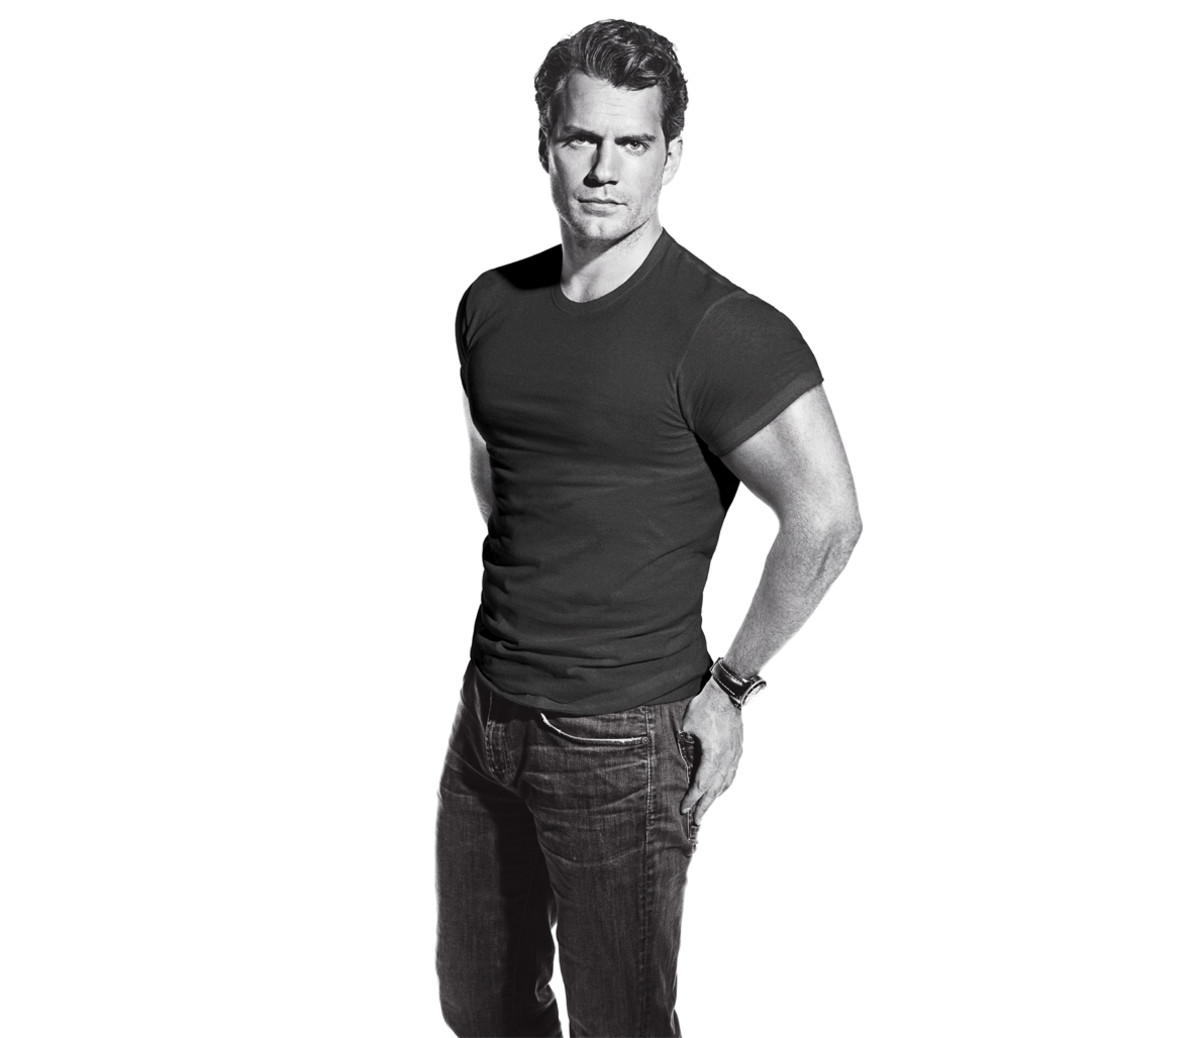 Henry Cavill reveals growing up with four brothers prepared him for a  career in action films